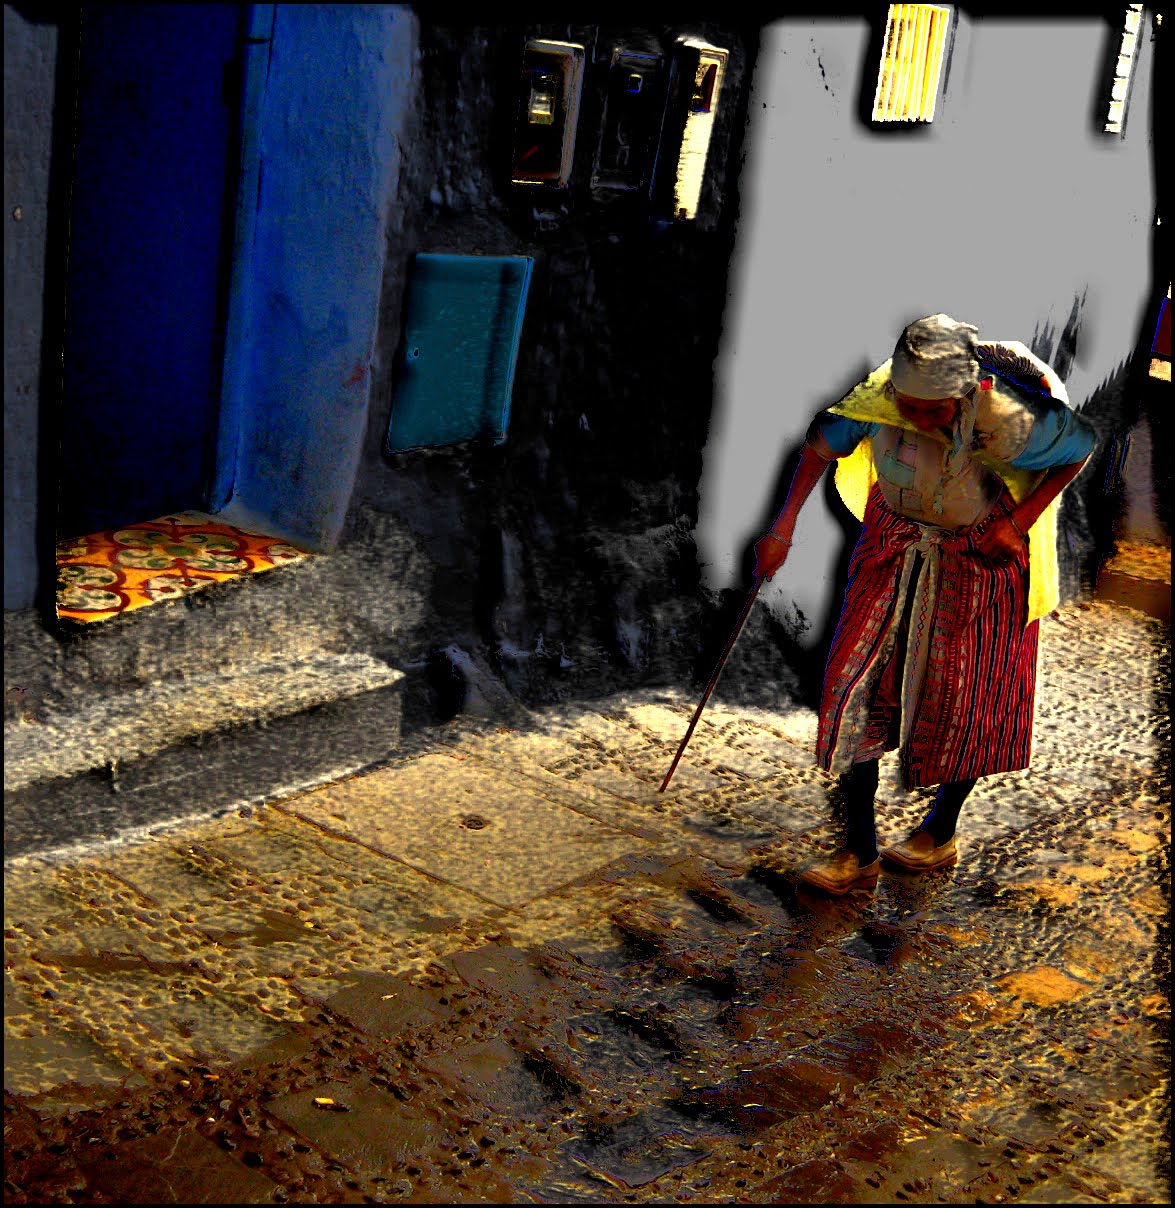 Chefchaouen: Old Woman